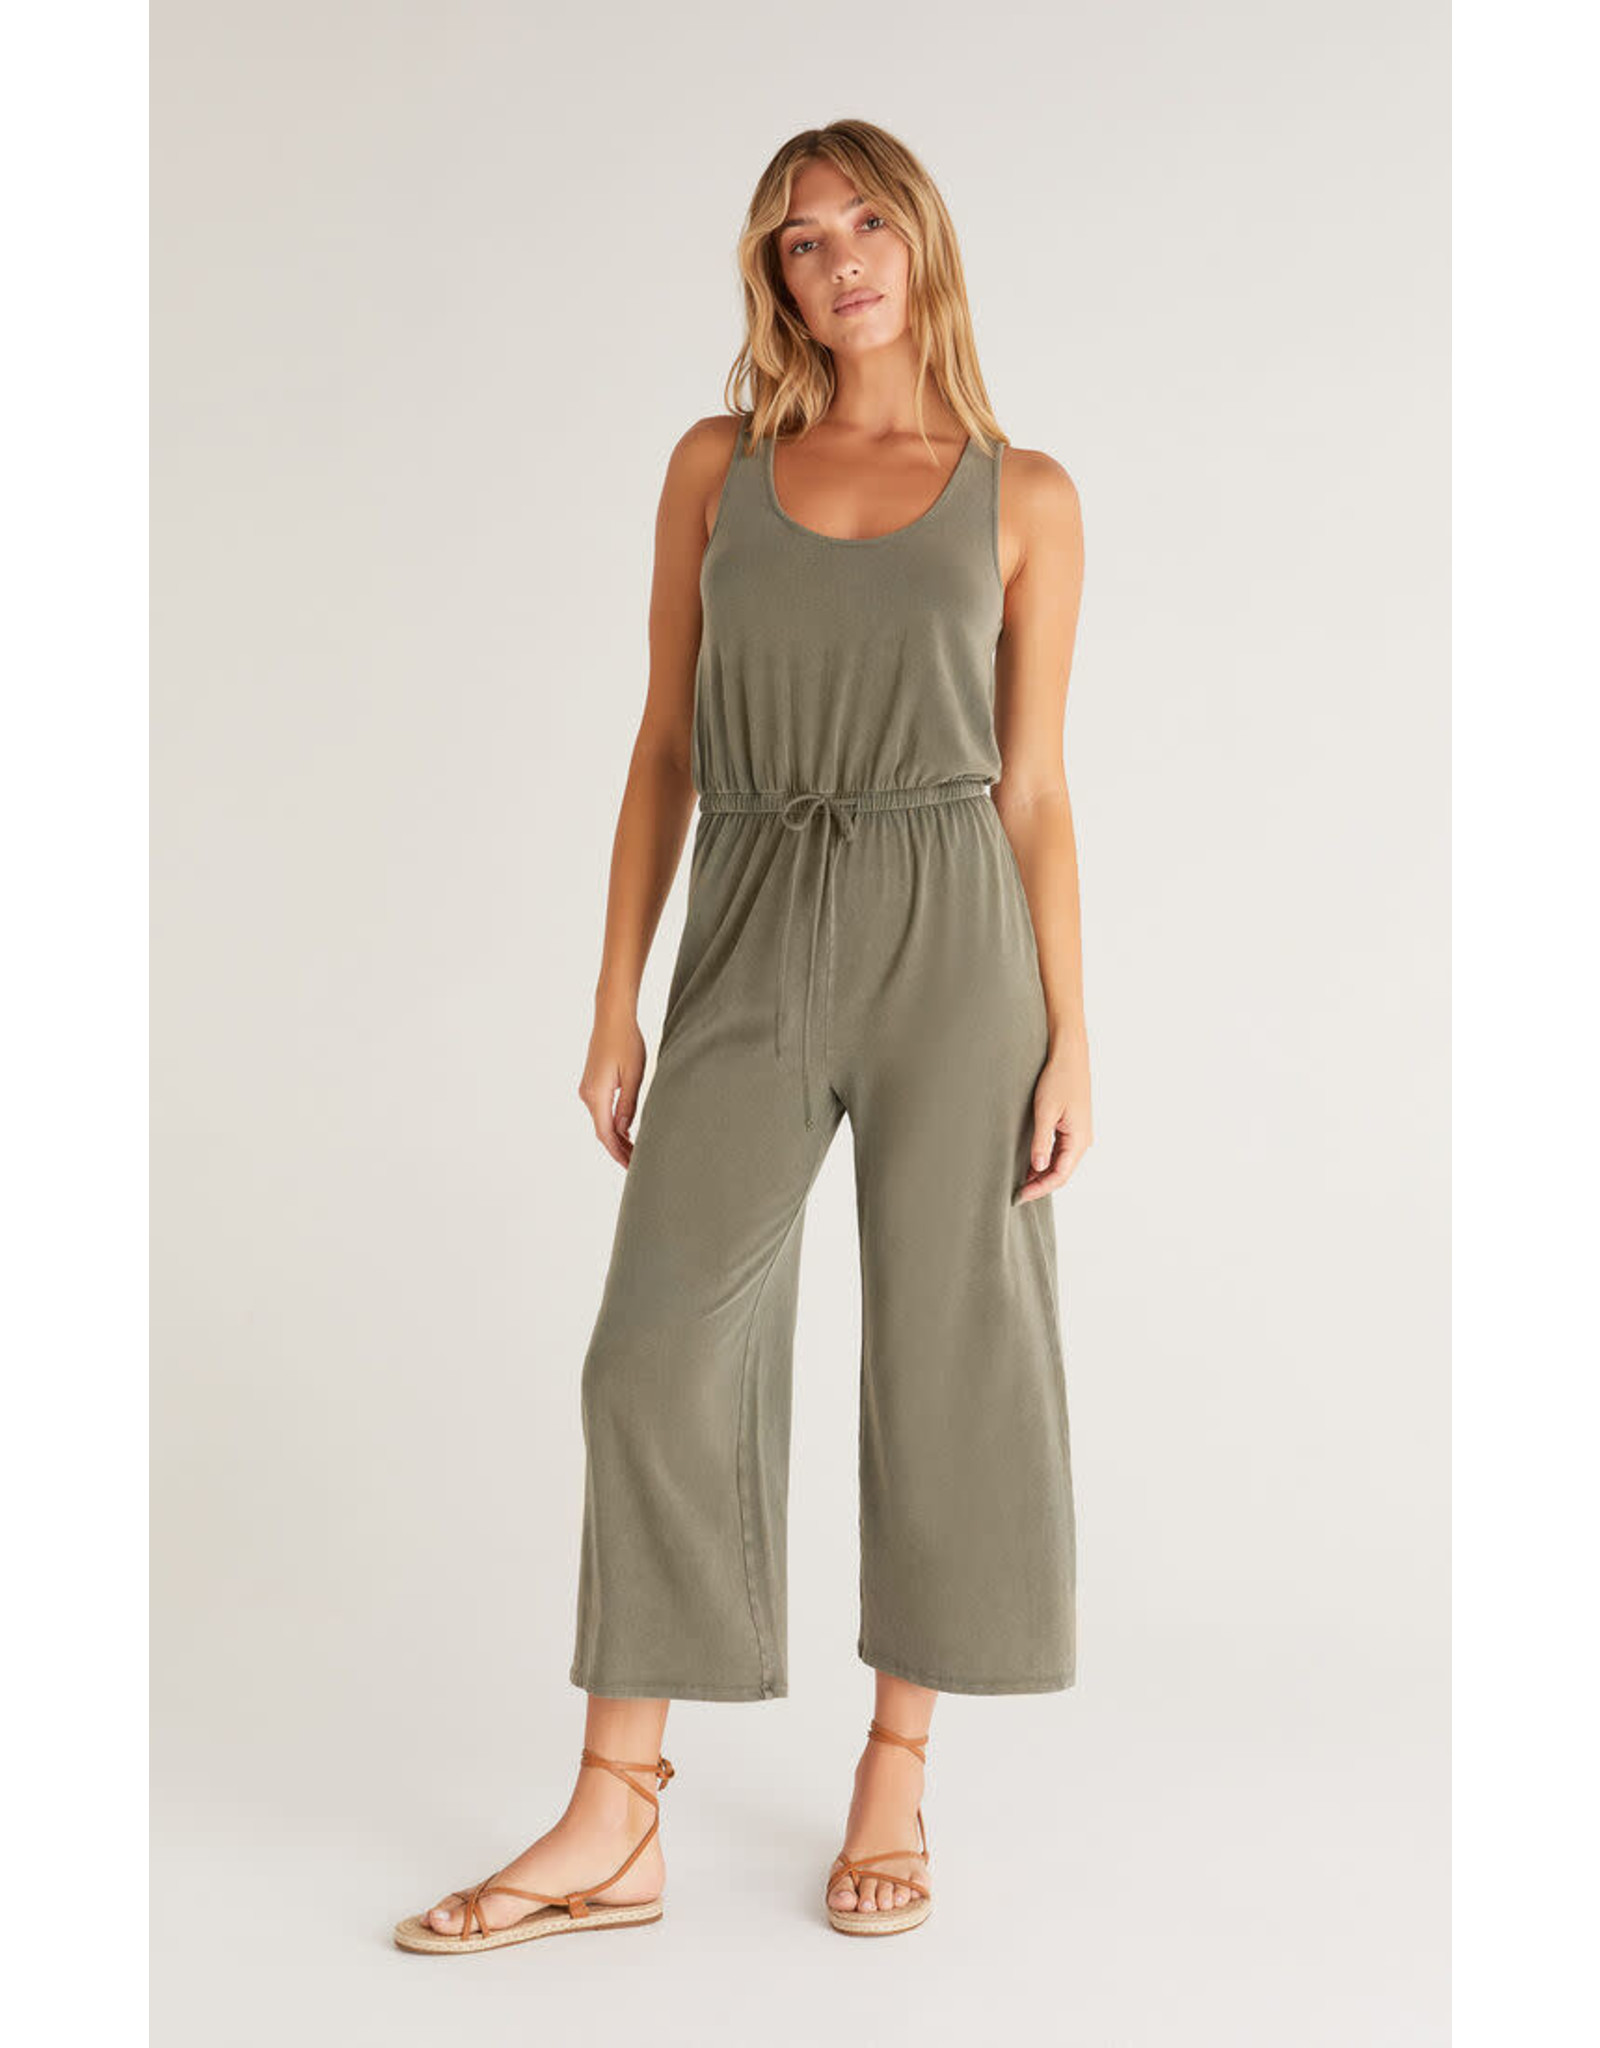 Z supply ZS Easygoing Jumpsuit